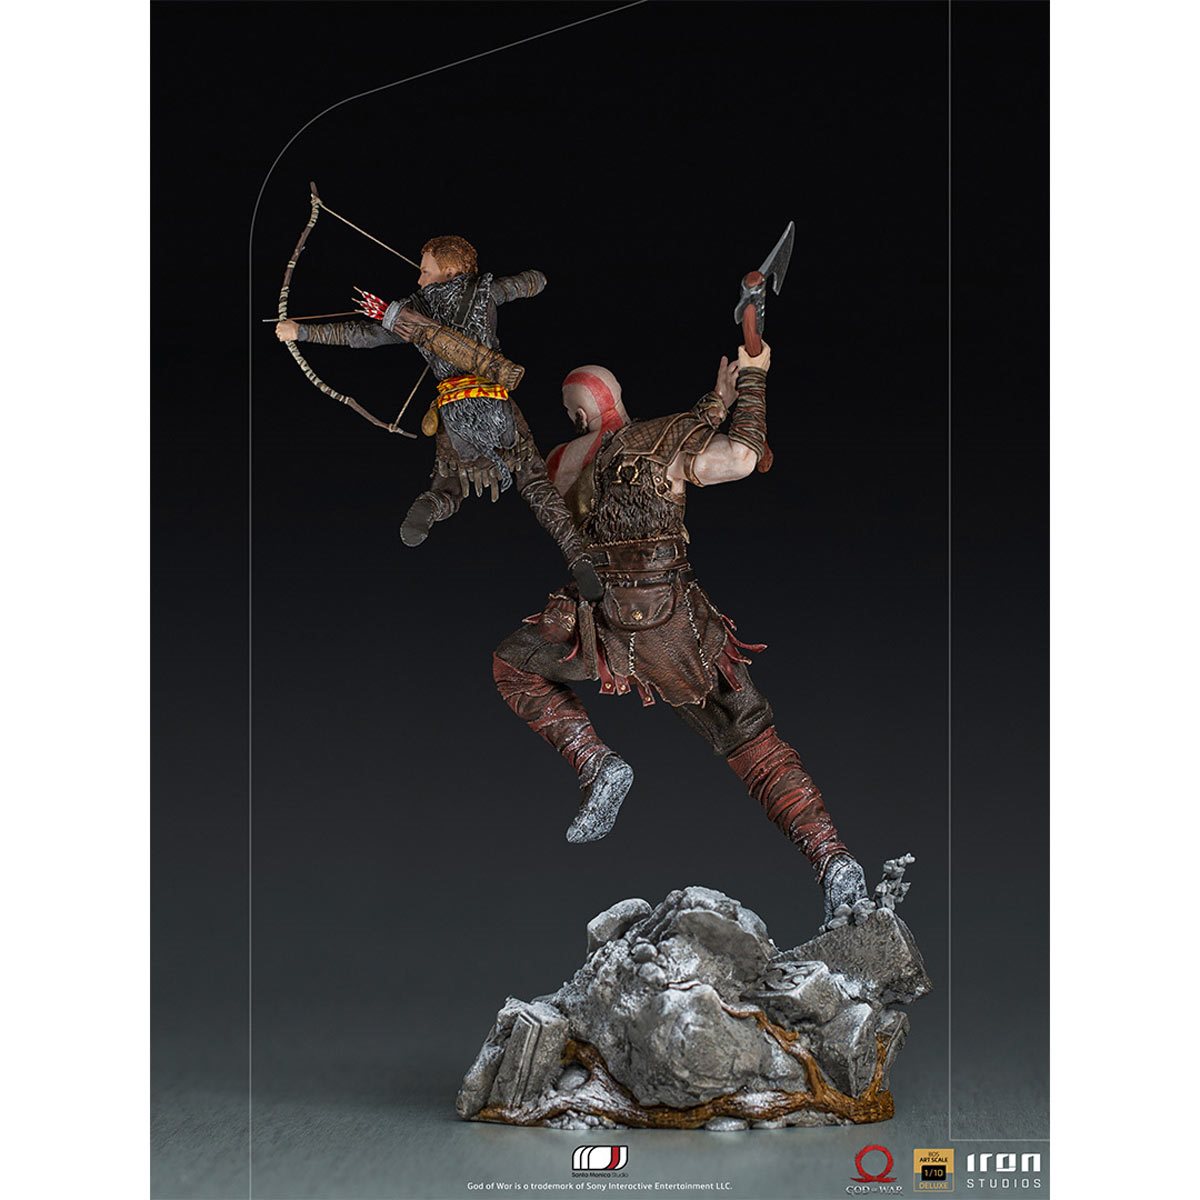 Kratos God Of War 1:4 Scale Figure by Neca - FREE SHIPPING - Spec